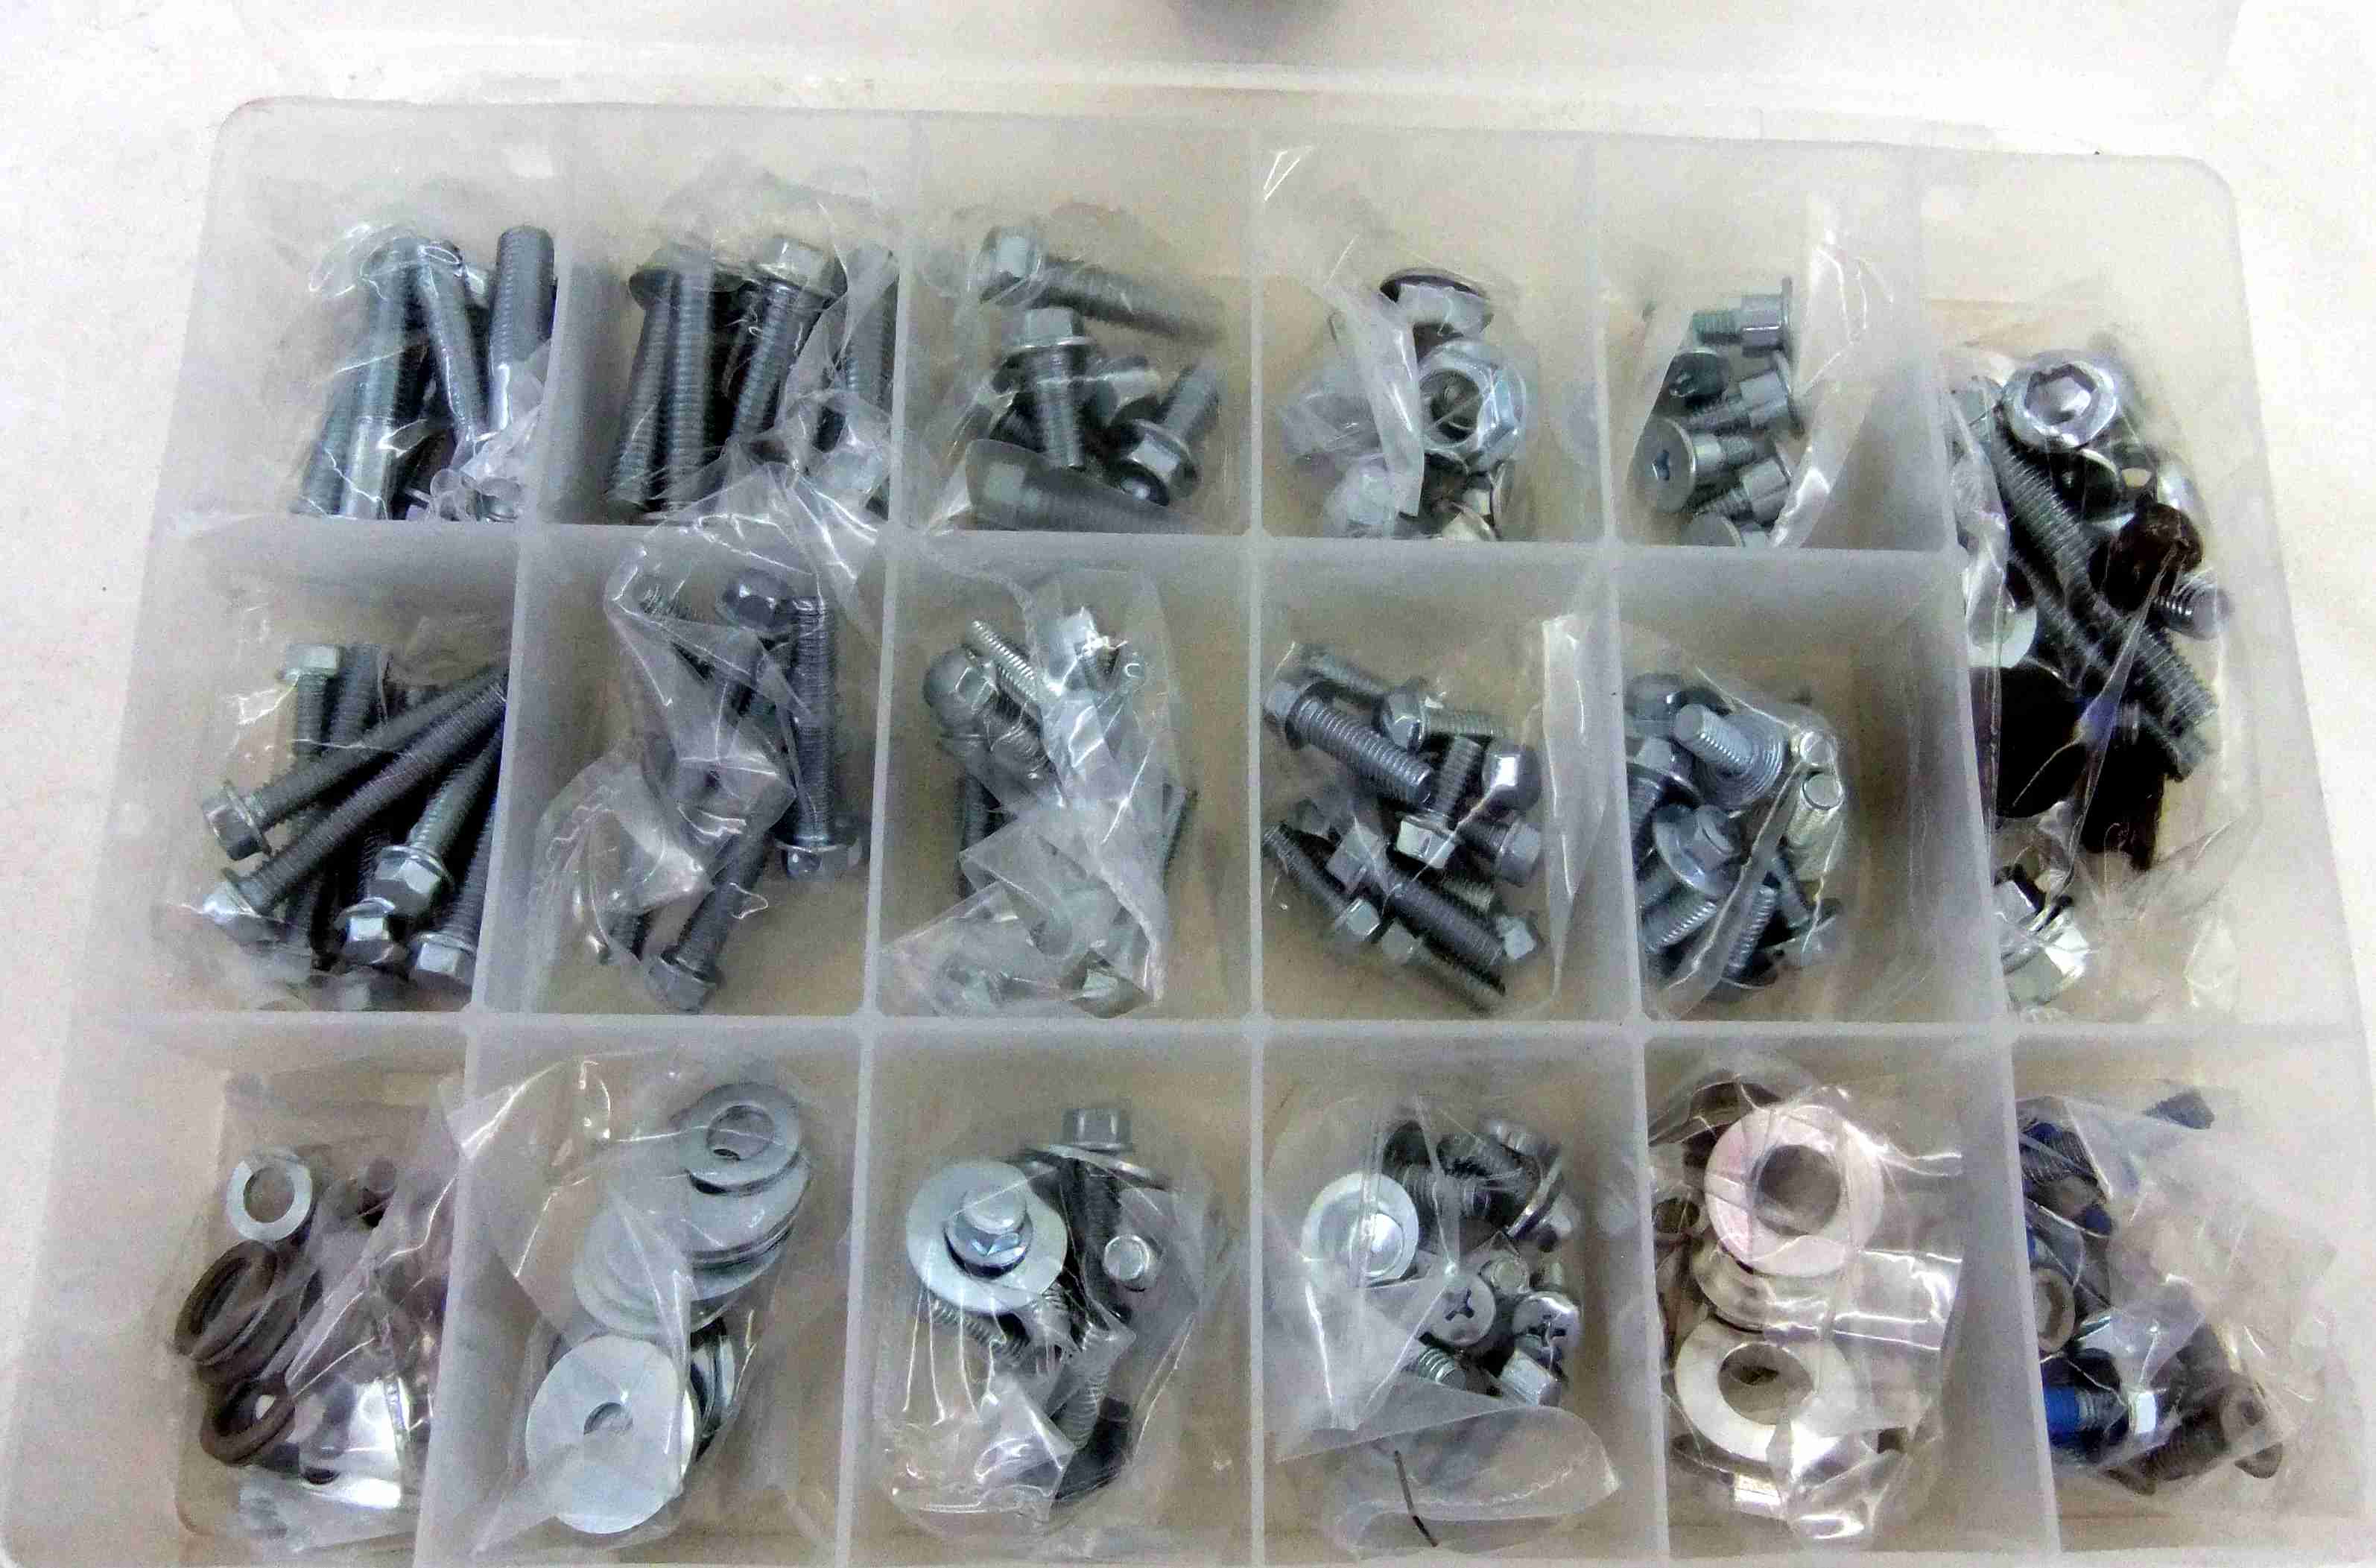 SCHREMS FACTORY SET OF BOLTS AND WASHERS, 160 PIECES ALL YAMAHA YZ/YZ-F MODELLE